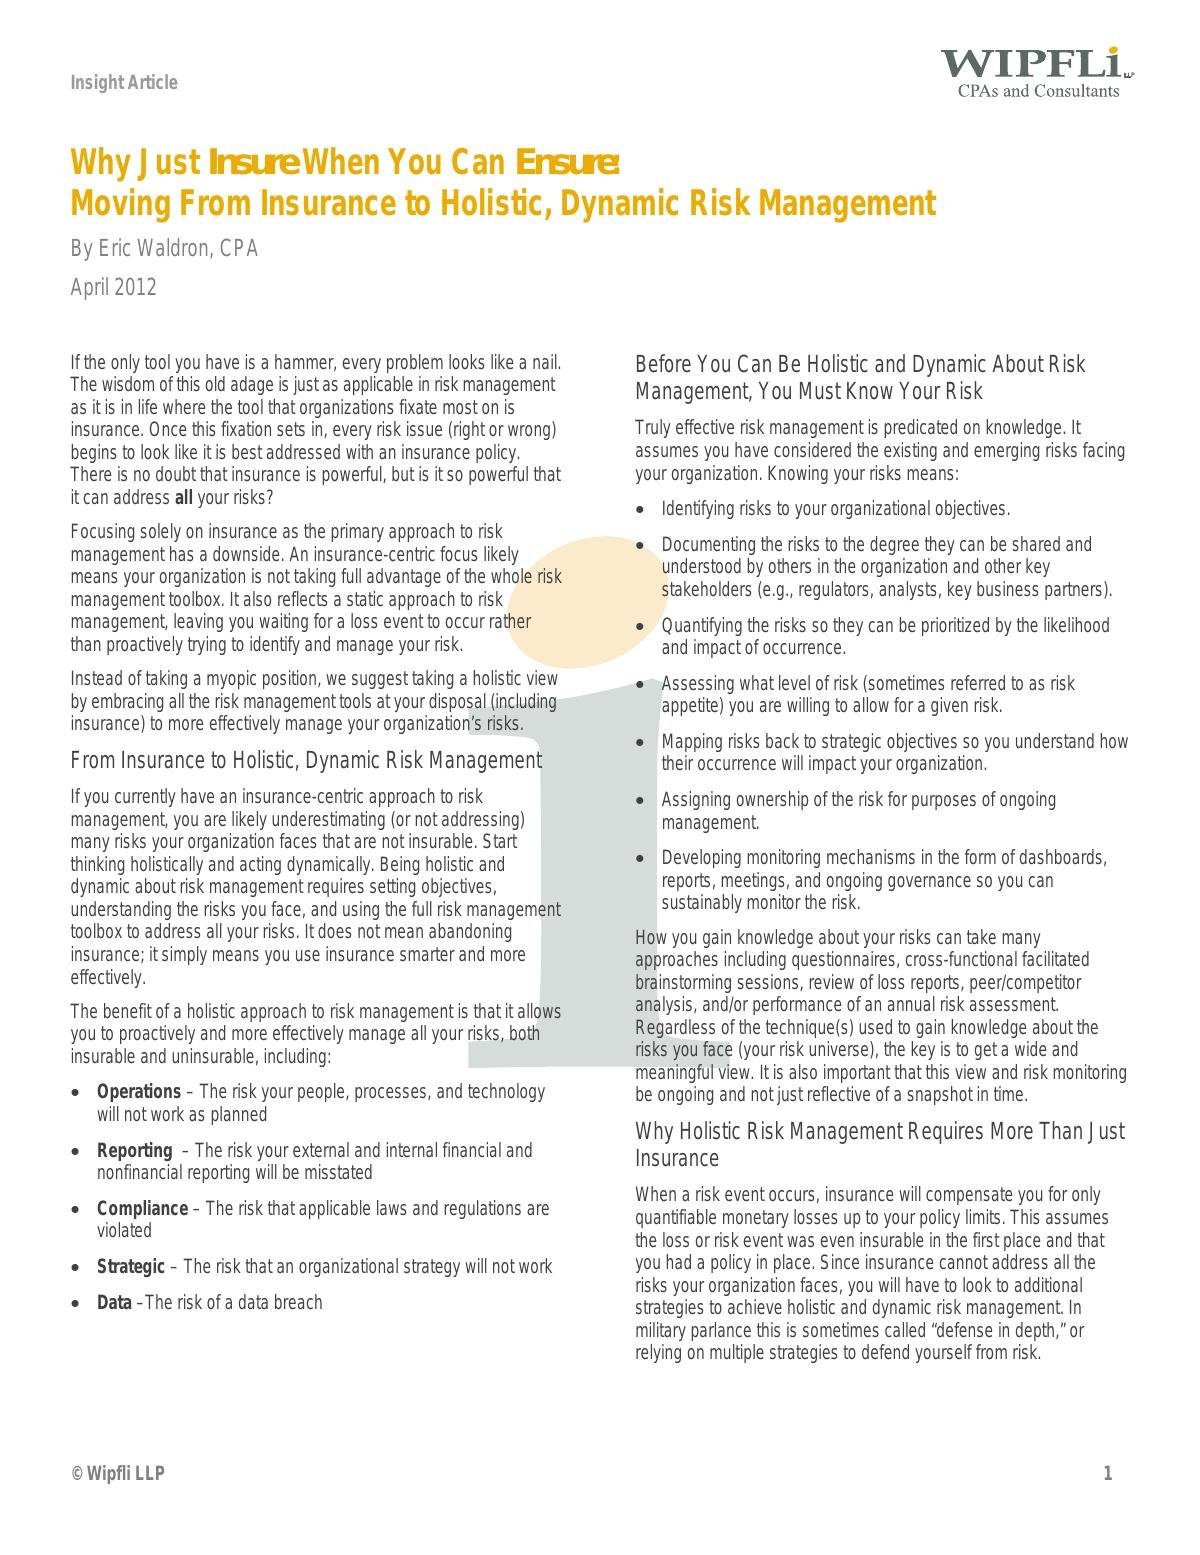 Why Just Insure When You Can Ensure? Moving From Insurance to Holistic, Dynamic Risk Management